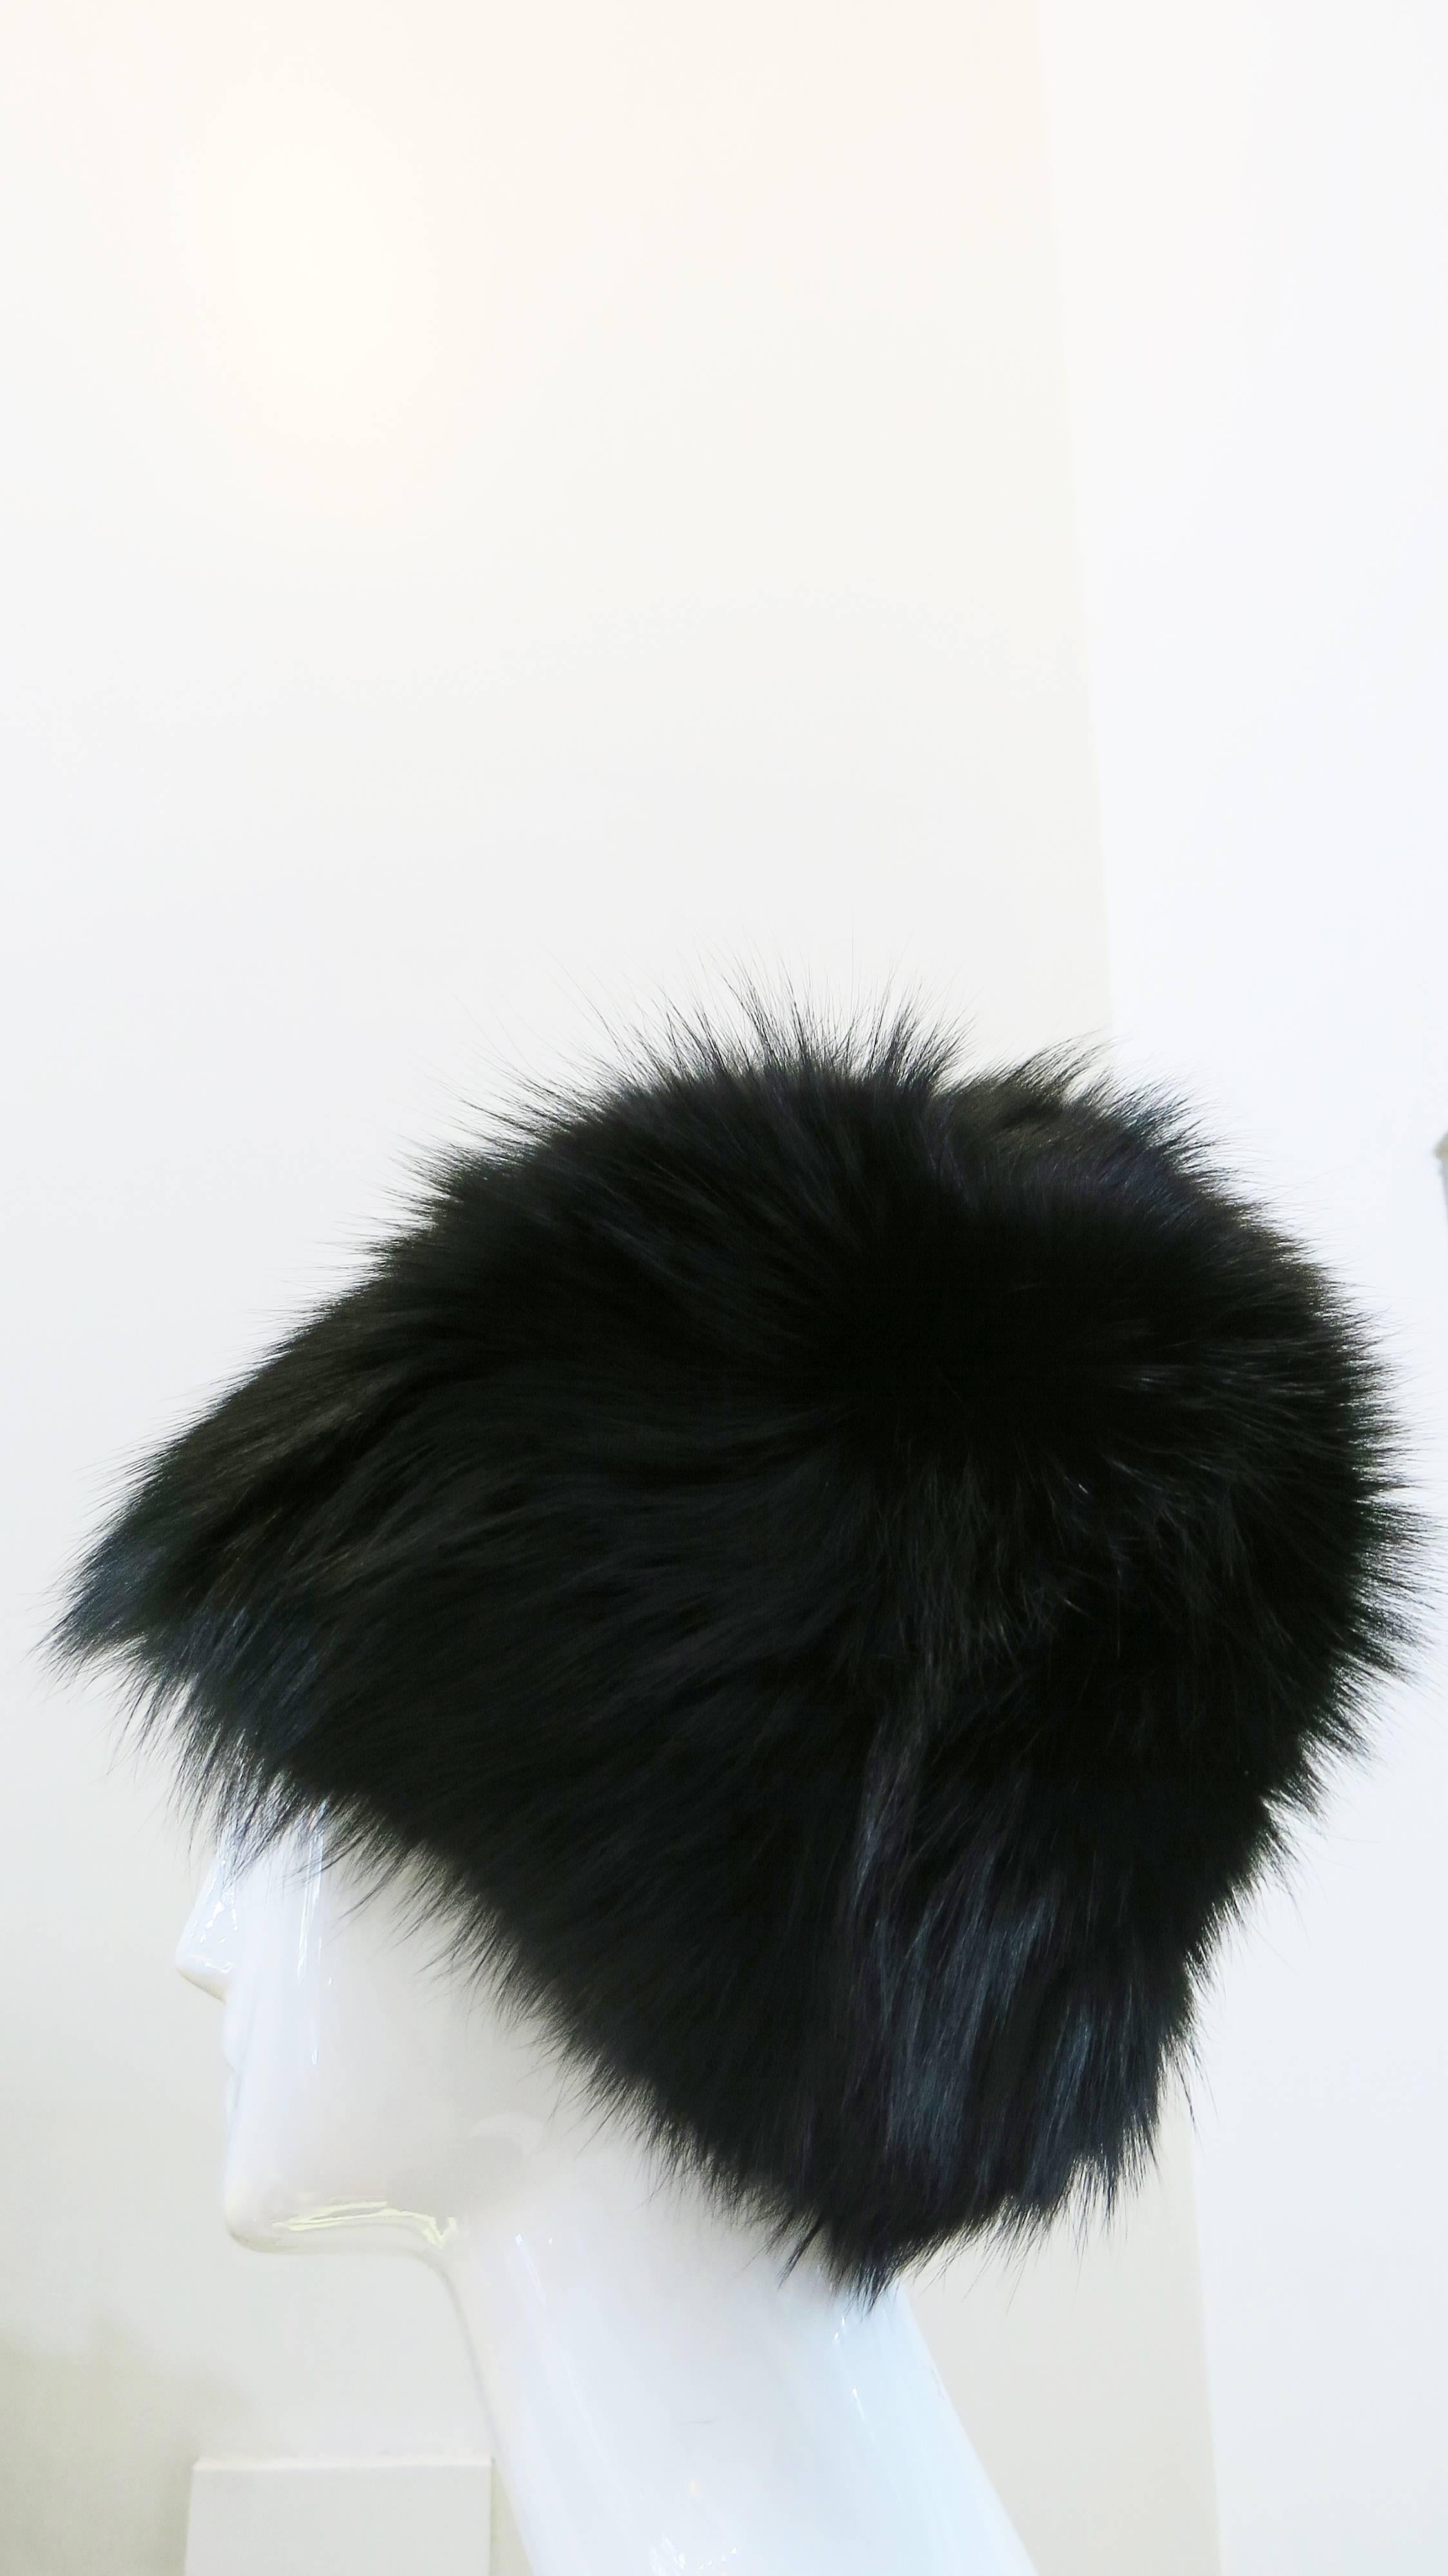 Fully lined black fox fur hats from Saks Fifth Avenue circa the 1970's. Beautiful, soft, and in impeccable condition. This hat is definitely on the larger side, so please pay attention to the measurements included below. Lining and stitching on the